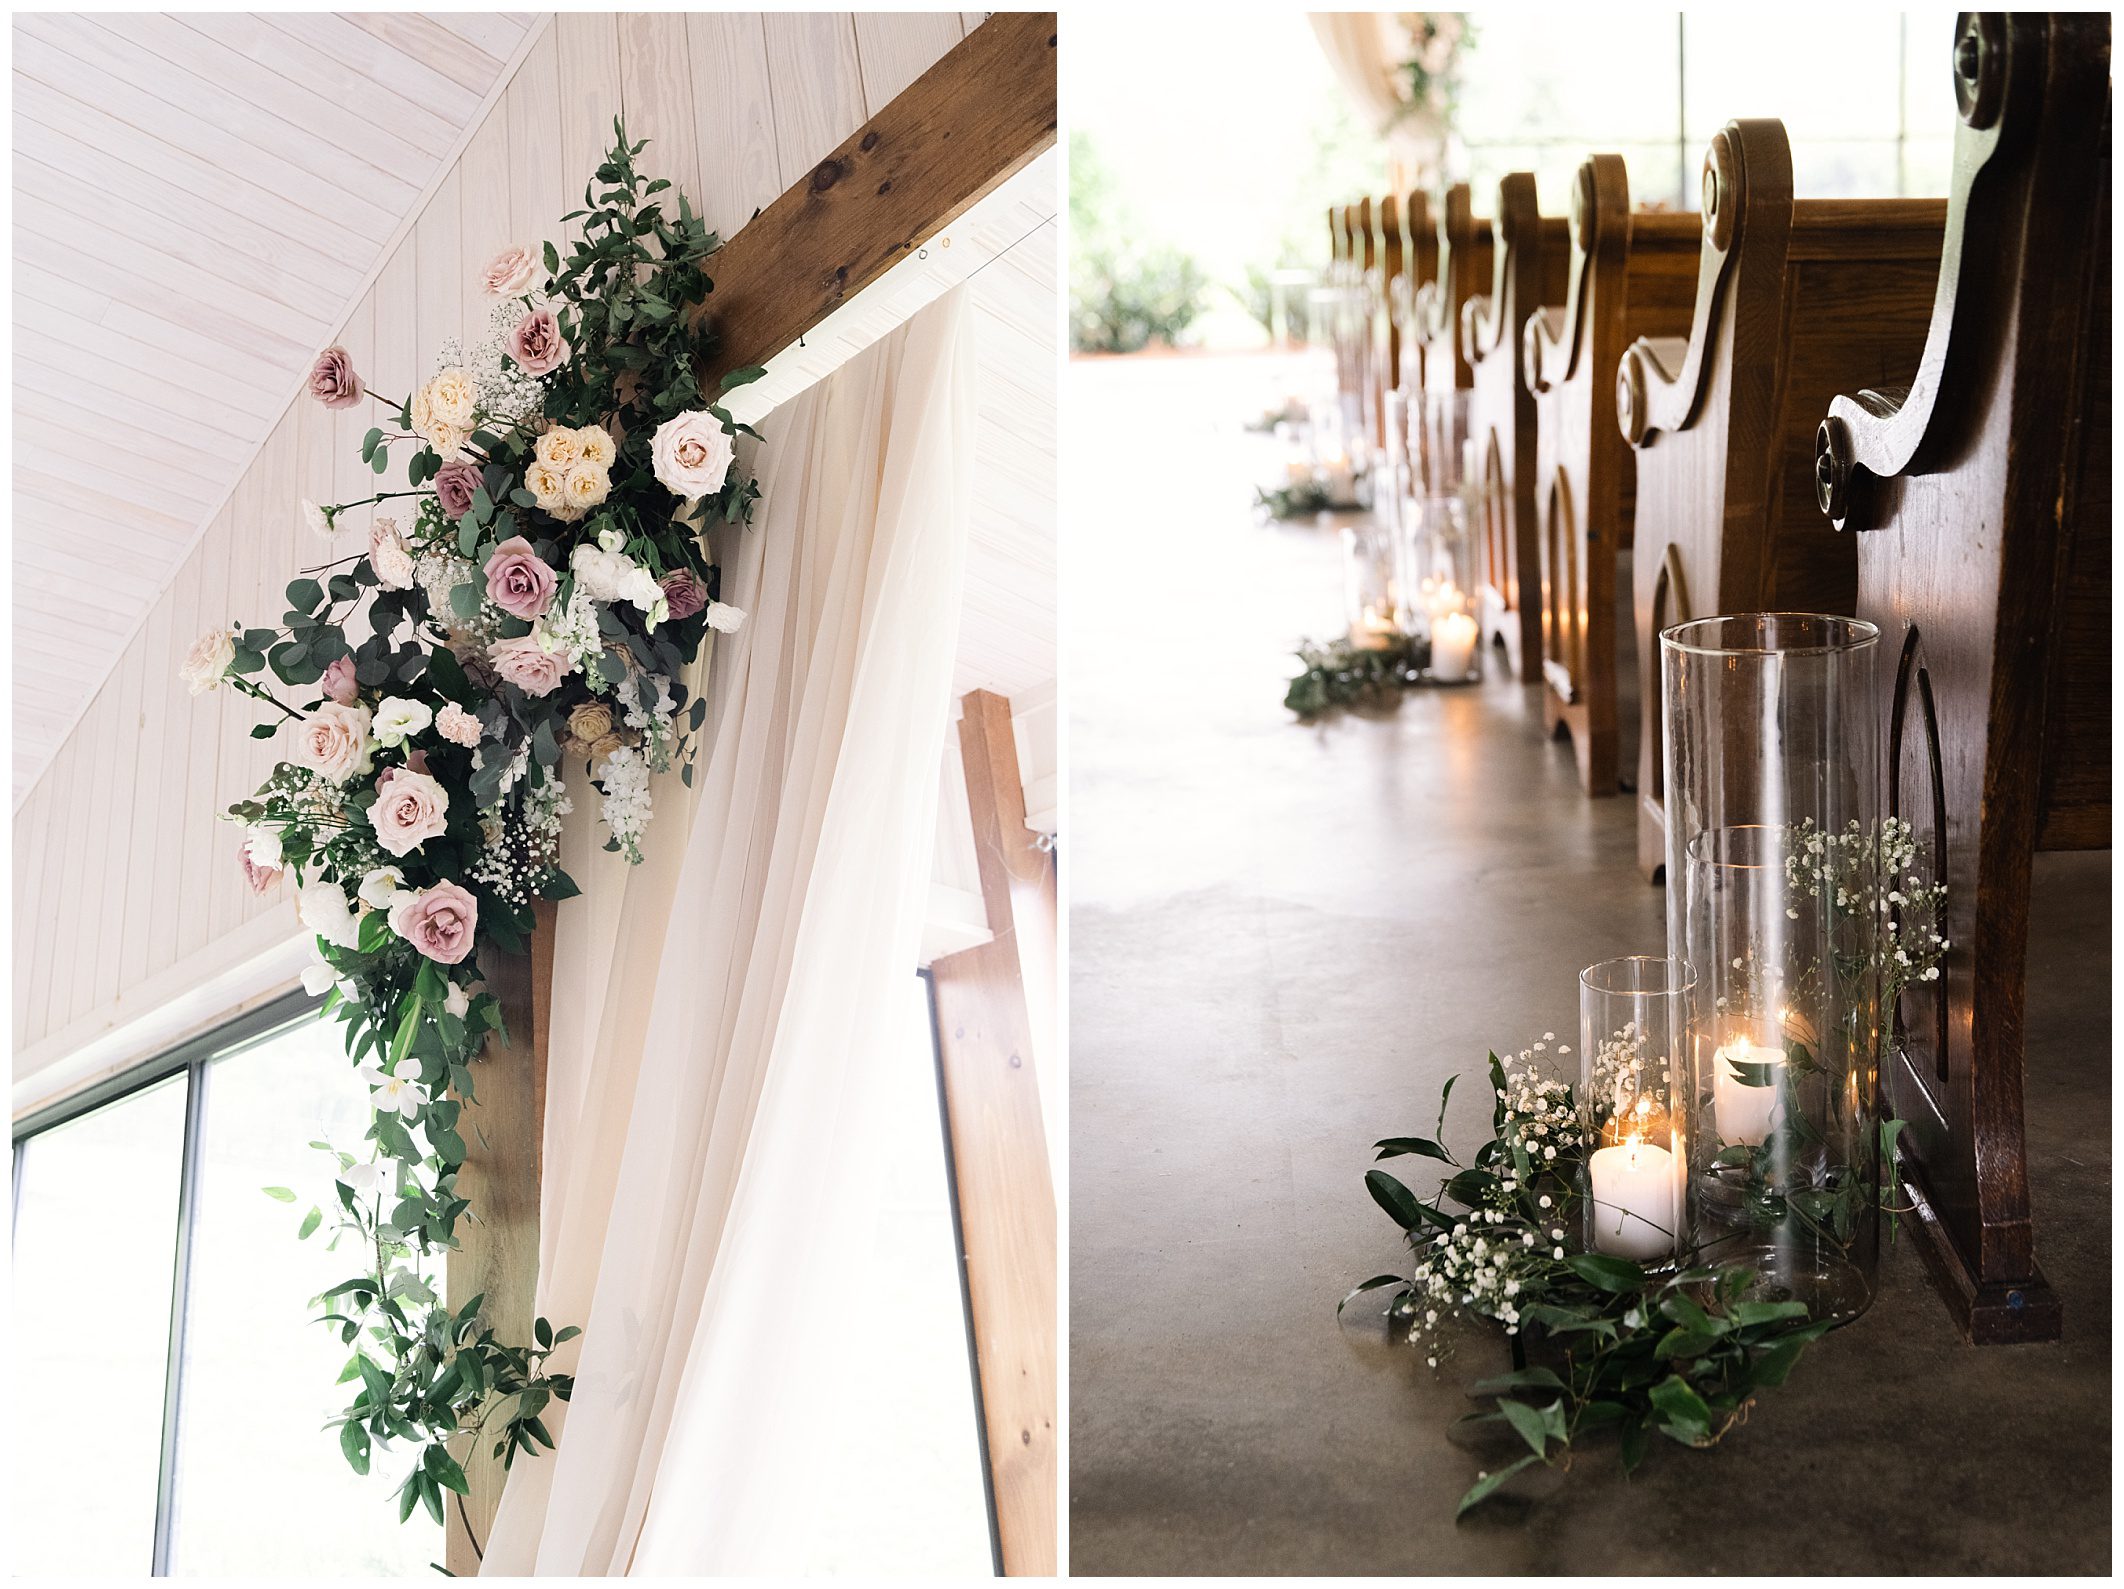 Floral arrangement on wooden beam and candle decorations along church pew at a mountain wedding venue.